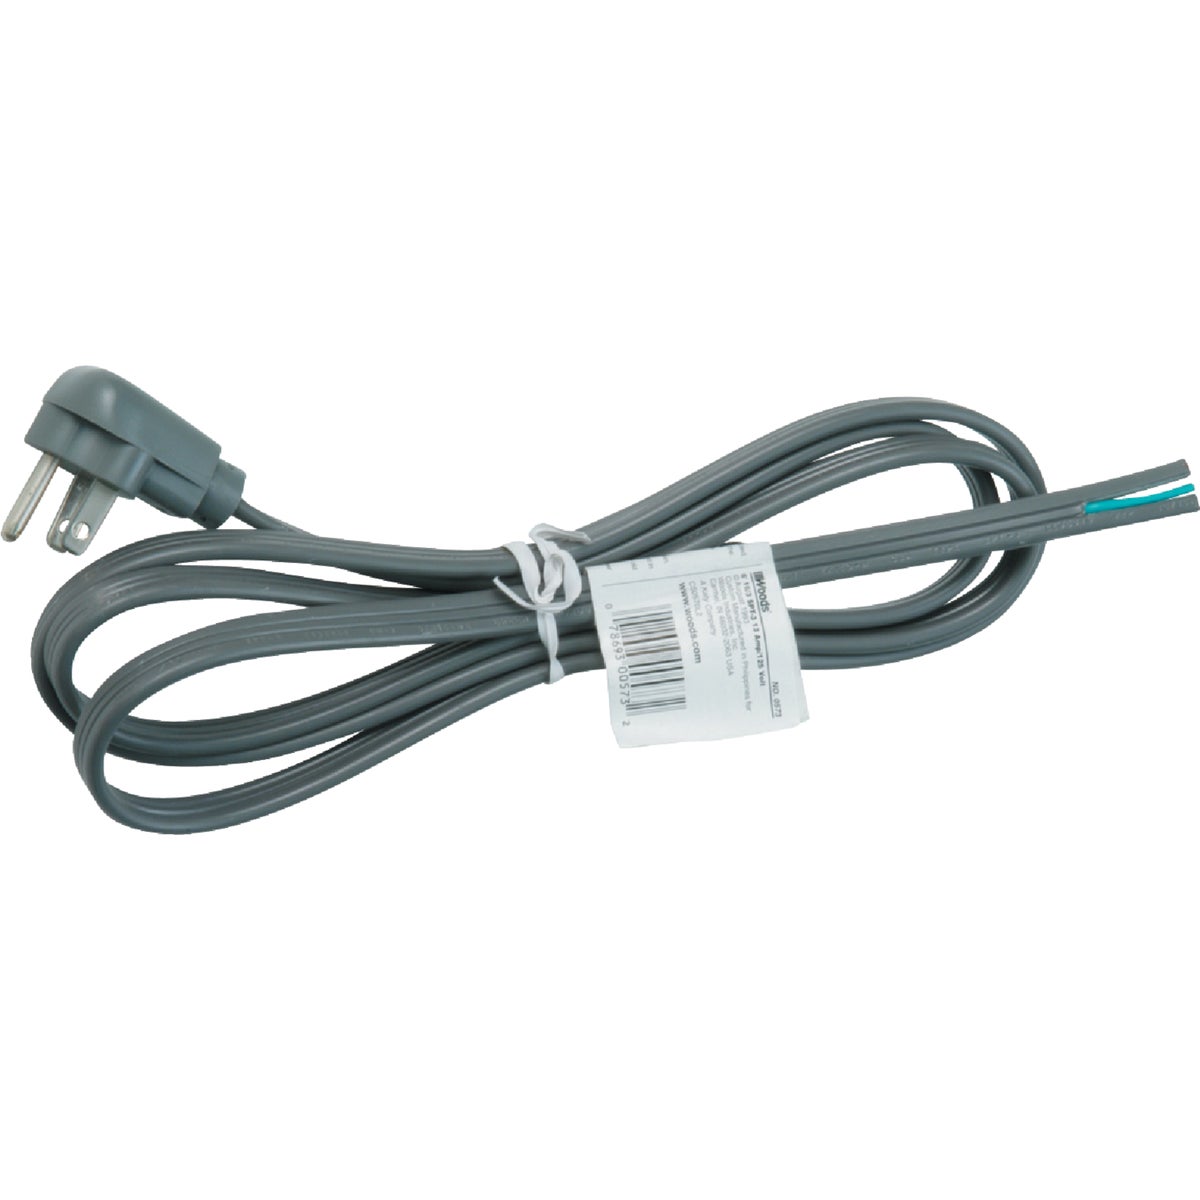 Woods 6 Ft. 16/3 13A Appliance Cord